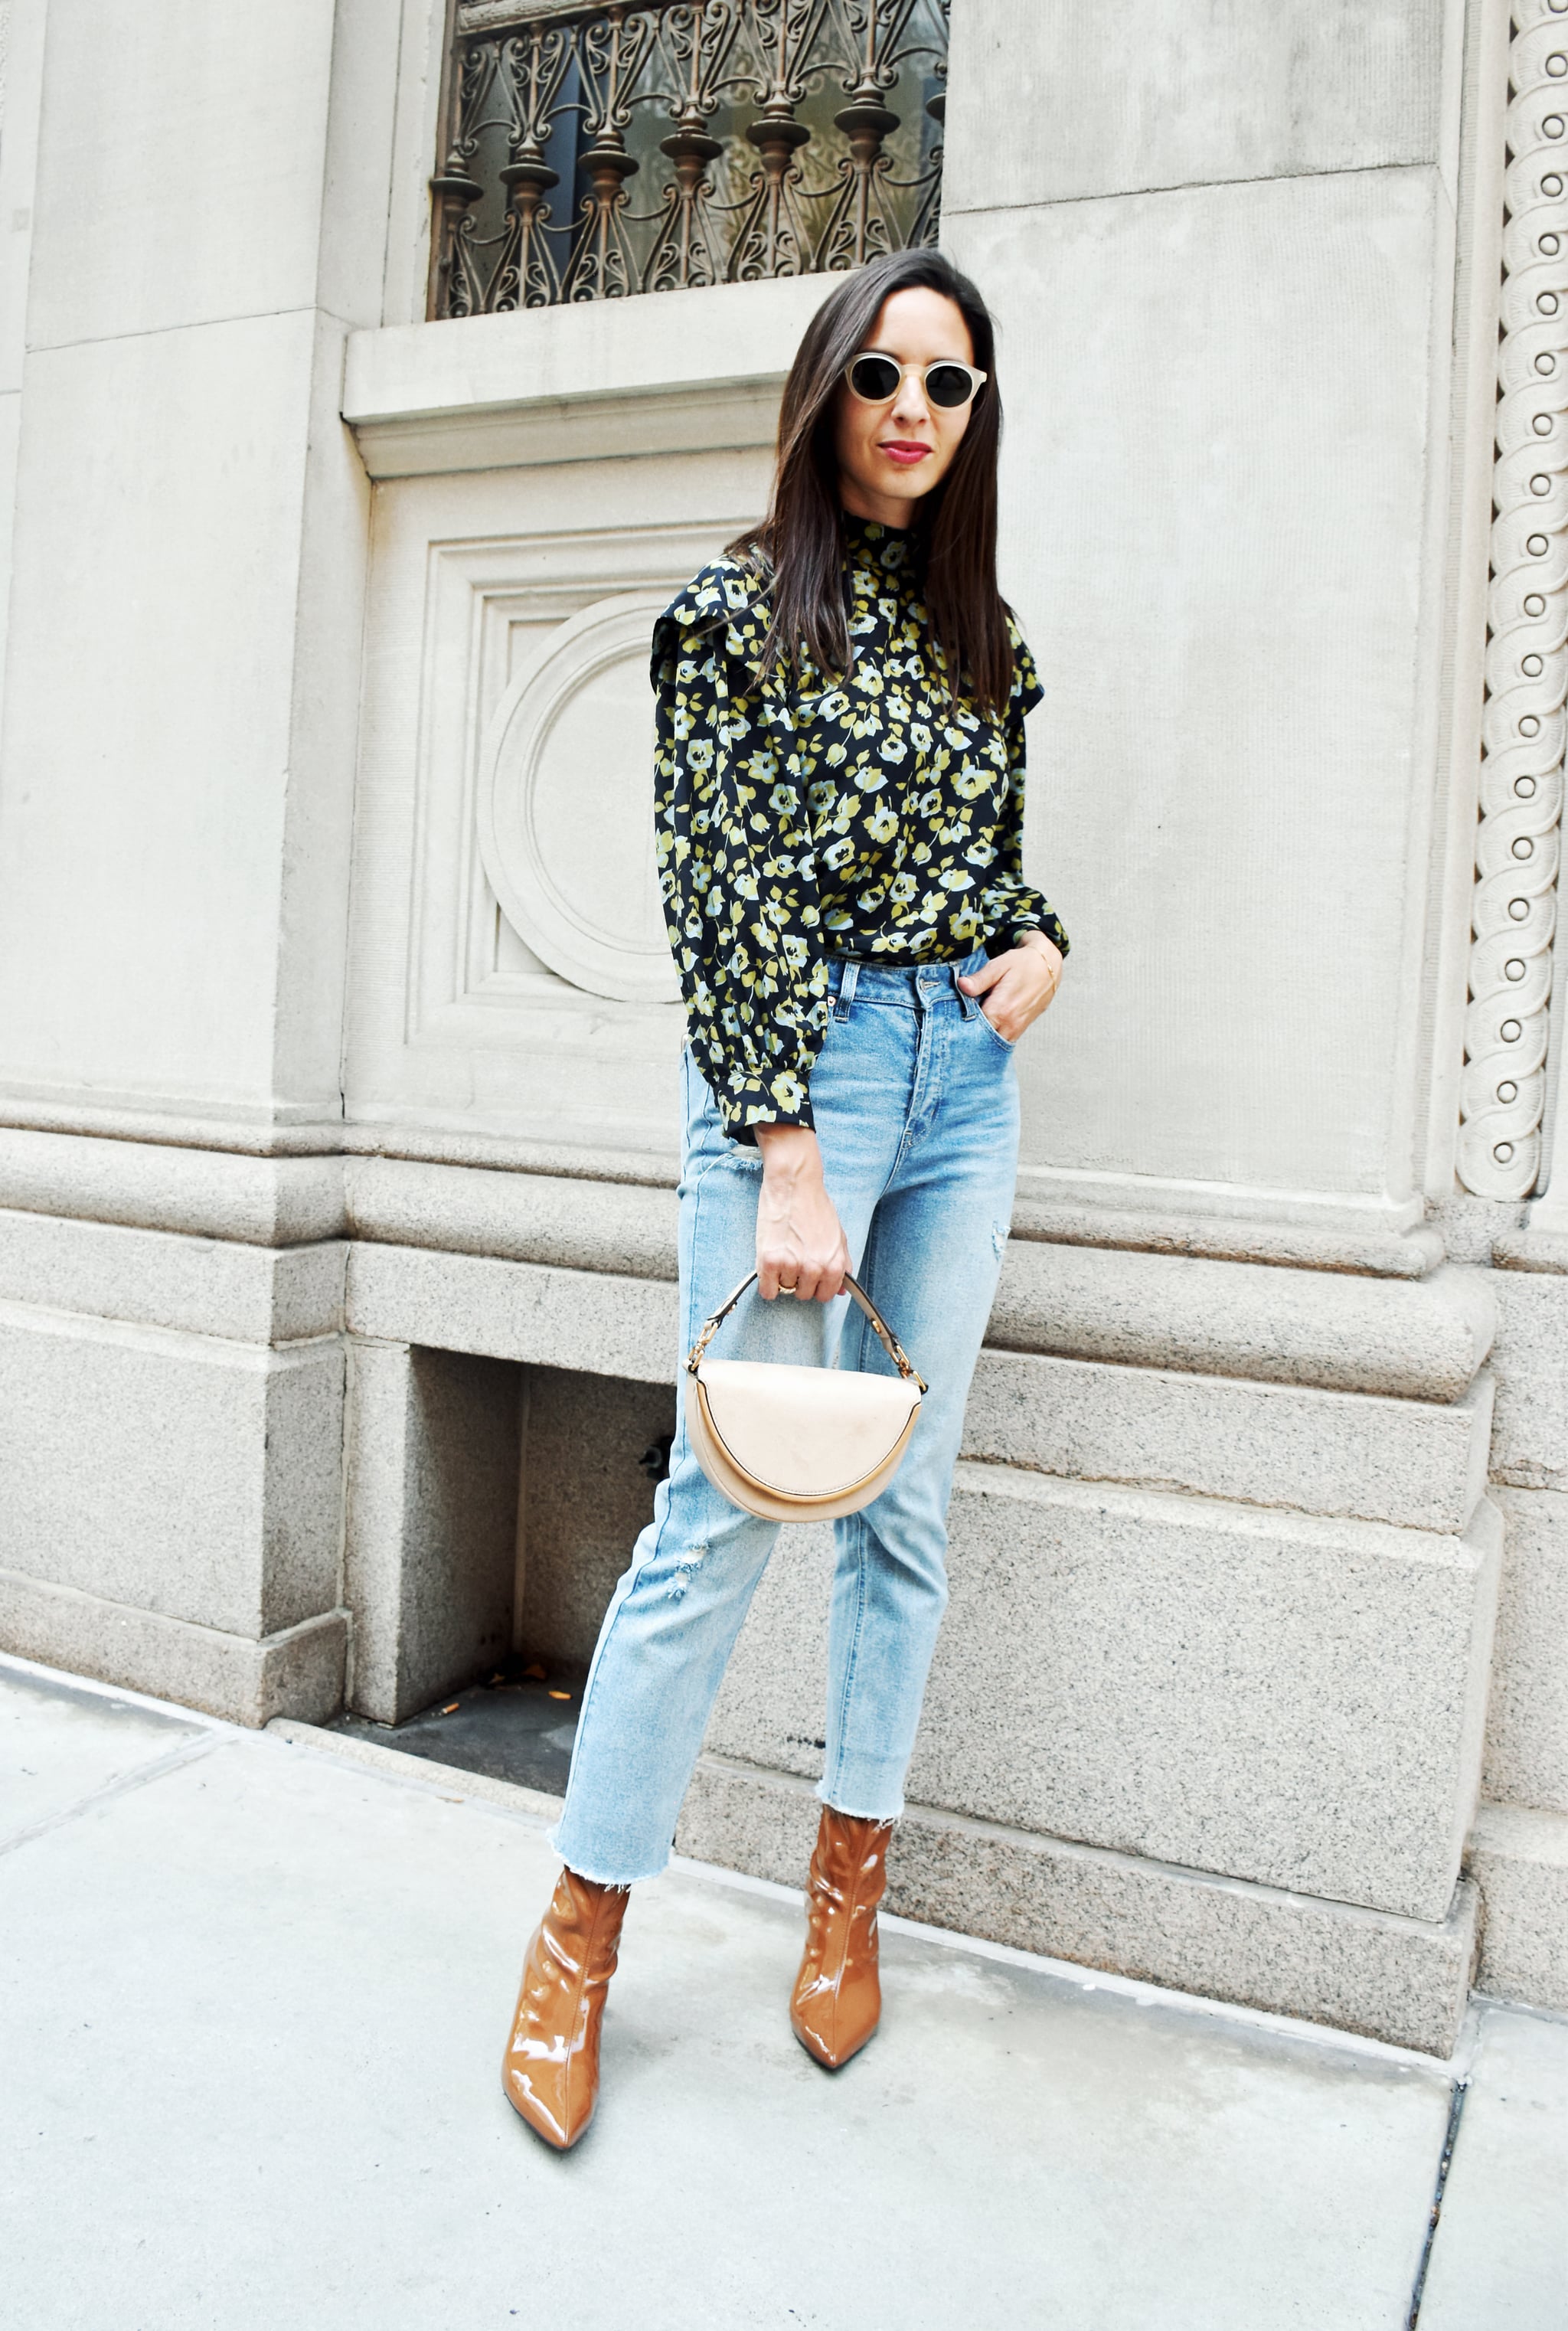 Easy Outfit Ideas: A Top, Jeans, and Boots | Easy Outfits: 2 Simple Style  Hacks That Make Your Top and Jeans Feel Fresh | POPSUGAR Fashion Photo 10